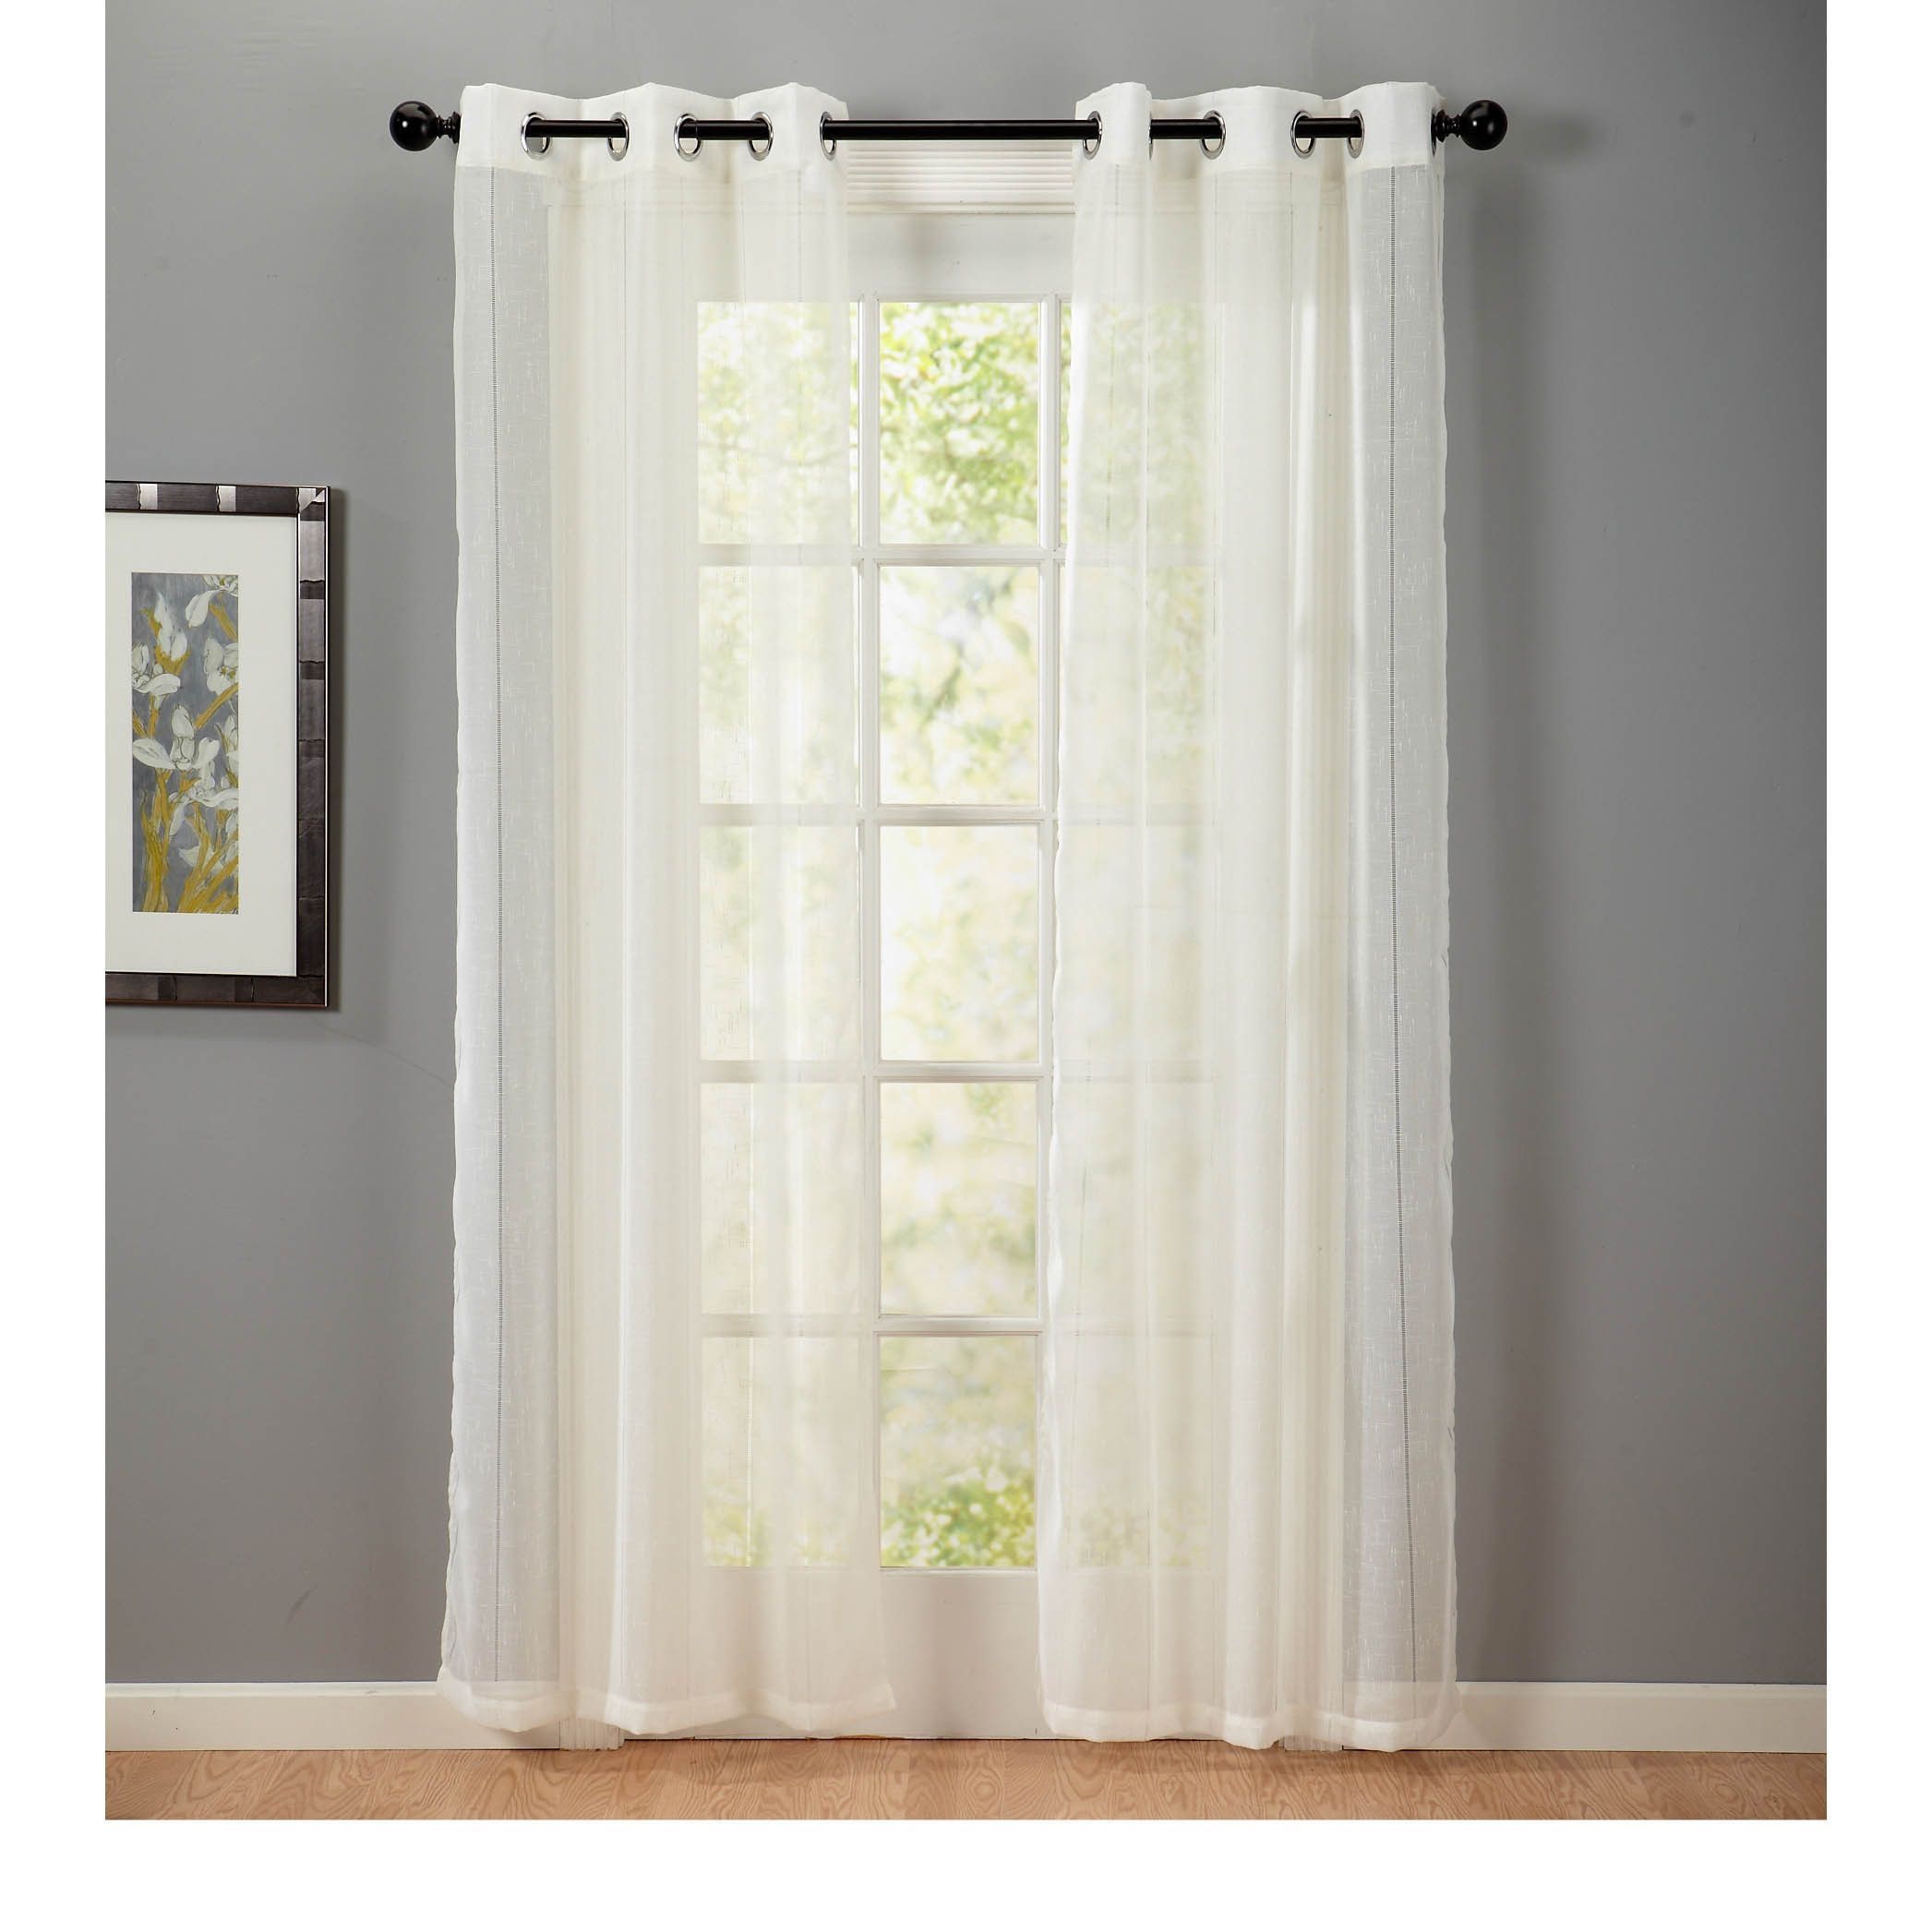 Home Fashion Designs Katherine Collection Textured Linen Grommet Pertaining To Linen Grommet Curtains (View 4 of 25)